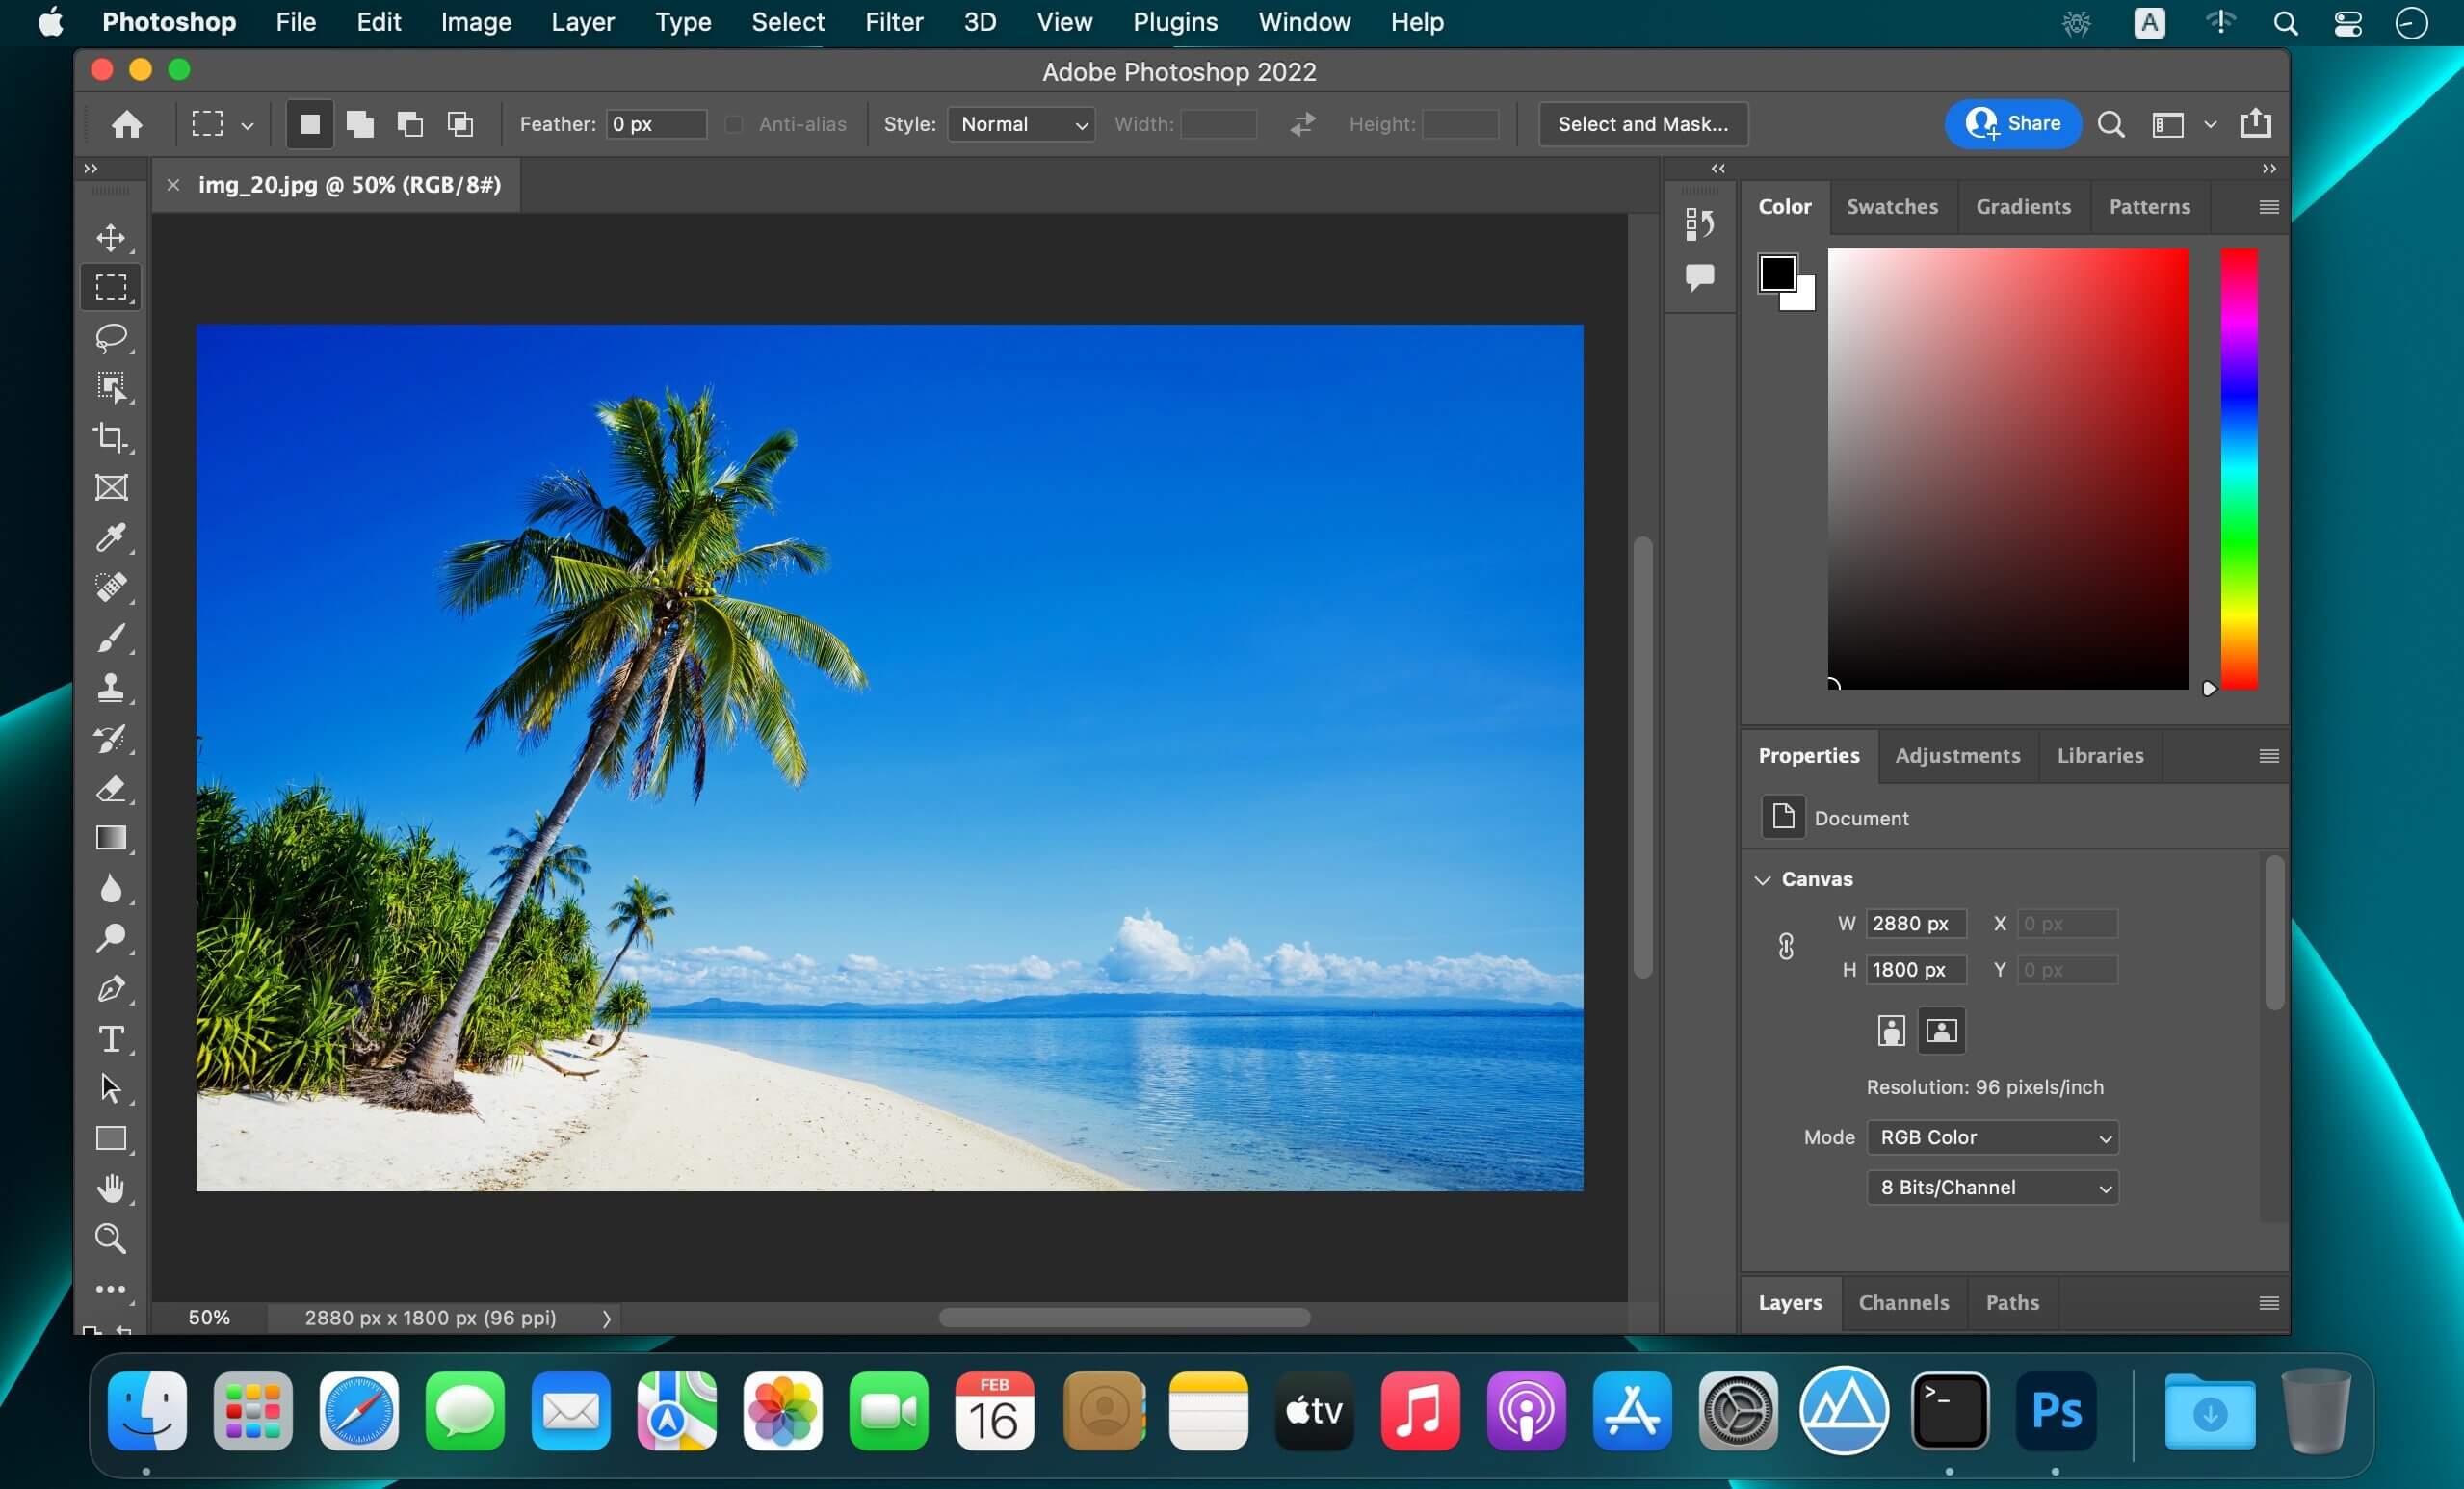 download adobe photoshop 2022 for free